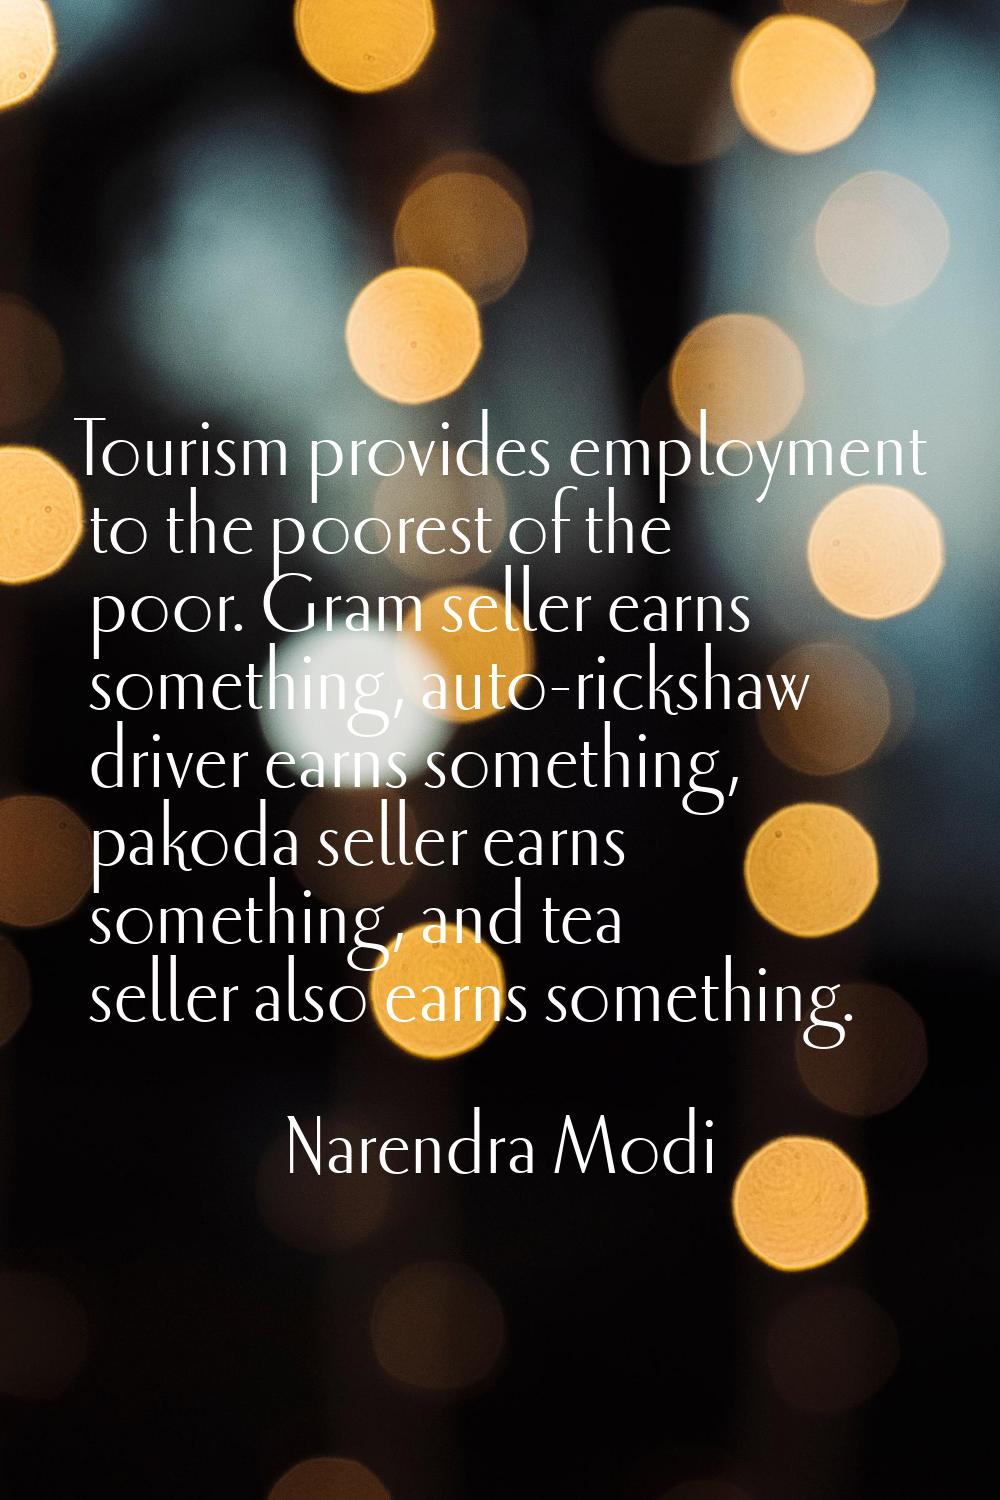 Tourism provides employment to the poorest of the poor. Gram seller earns something, auto-rickshaw 